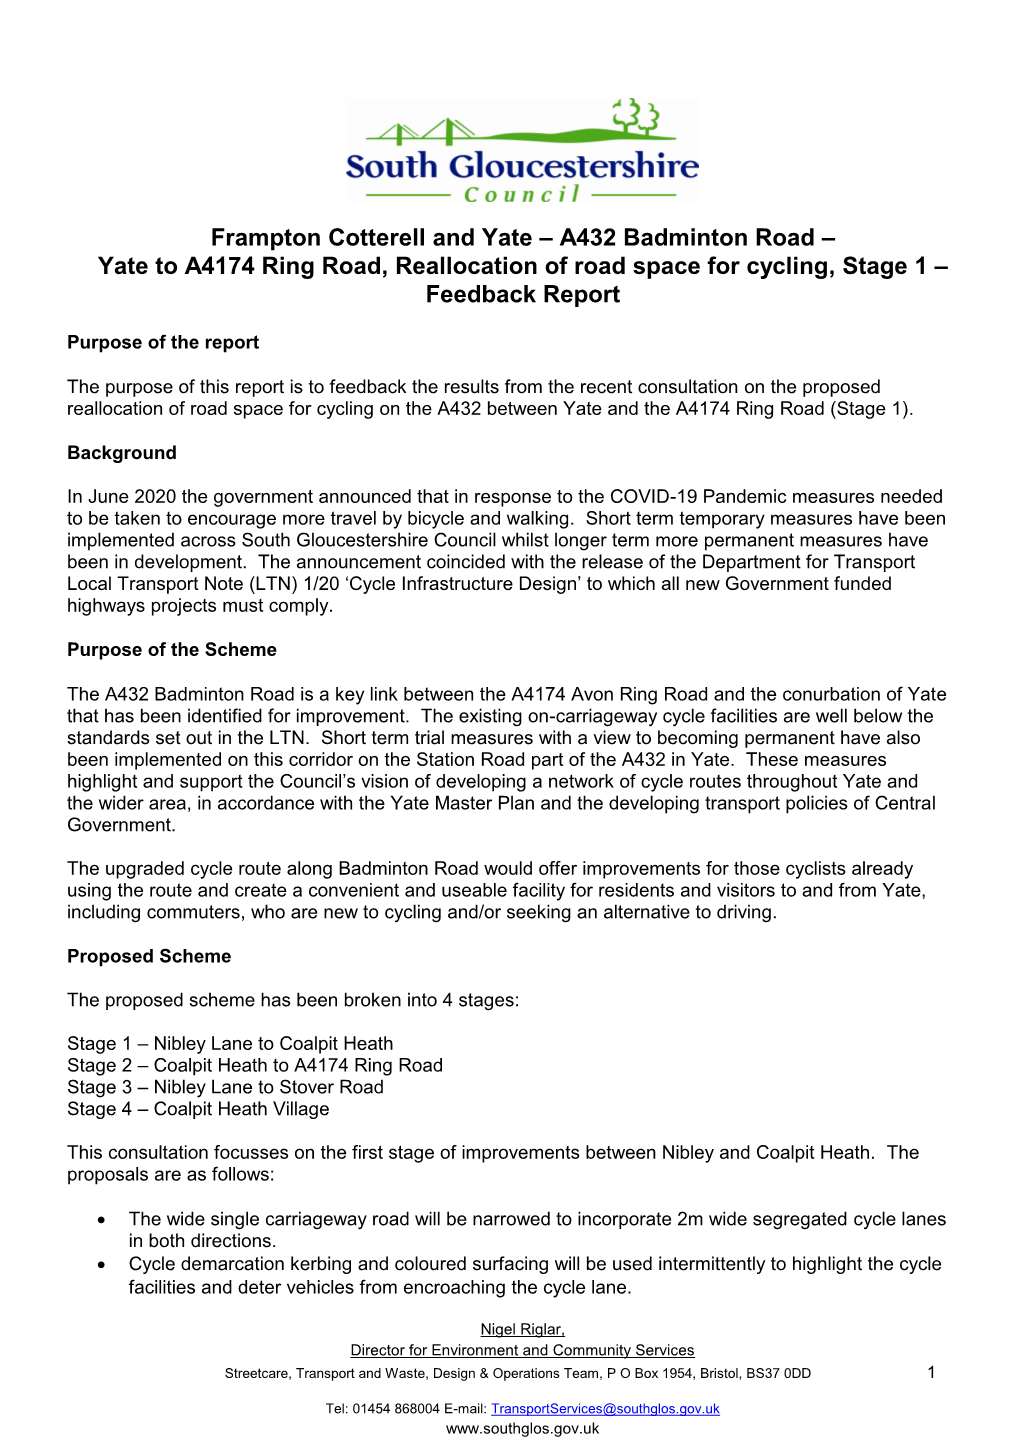 Frampton Cotterell and Yate – A432 Badminton Road – Yate to A4174 Ring Road, Reallocation of Road Space for Cycling, Stage 1 – Feedback Report